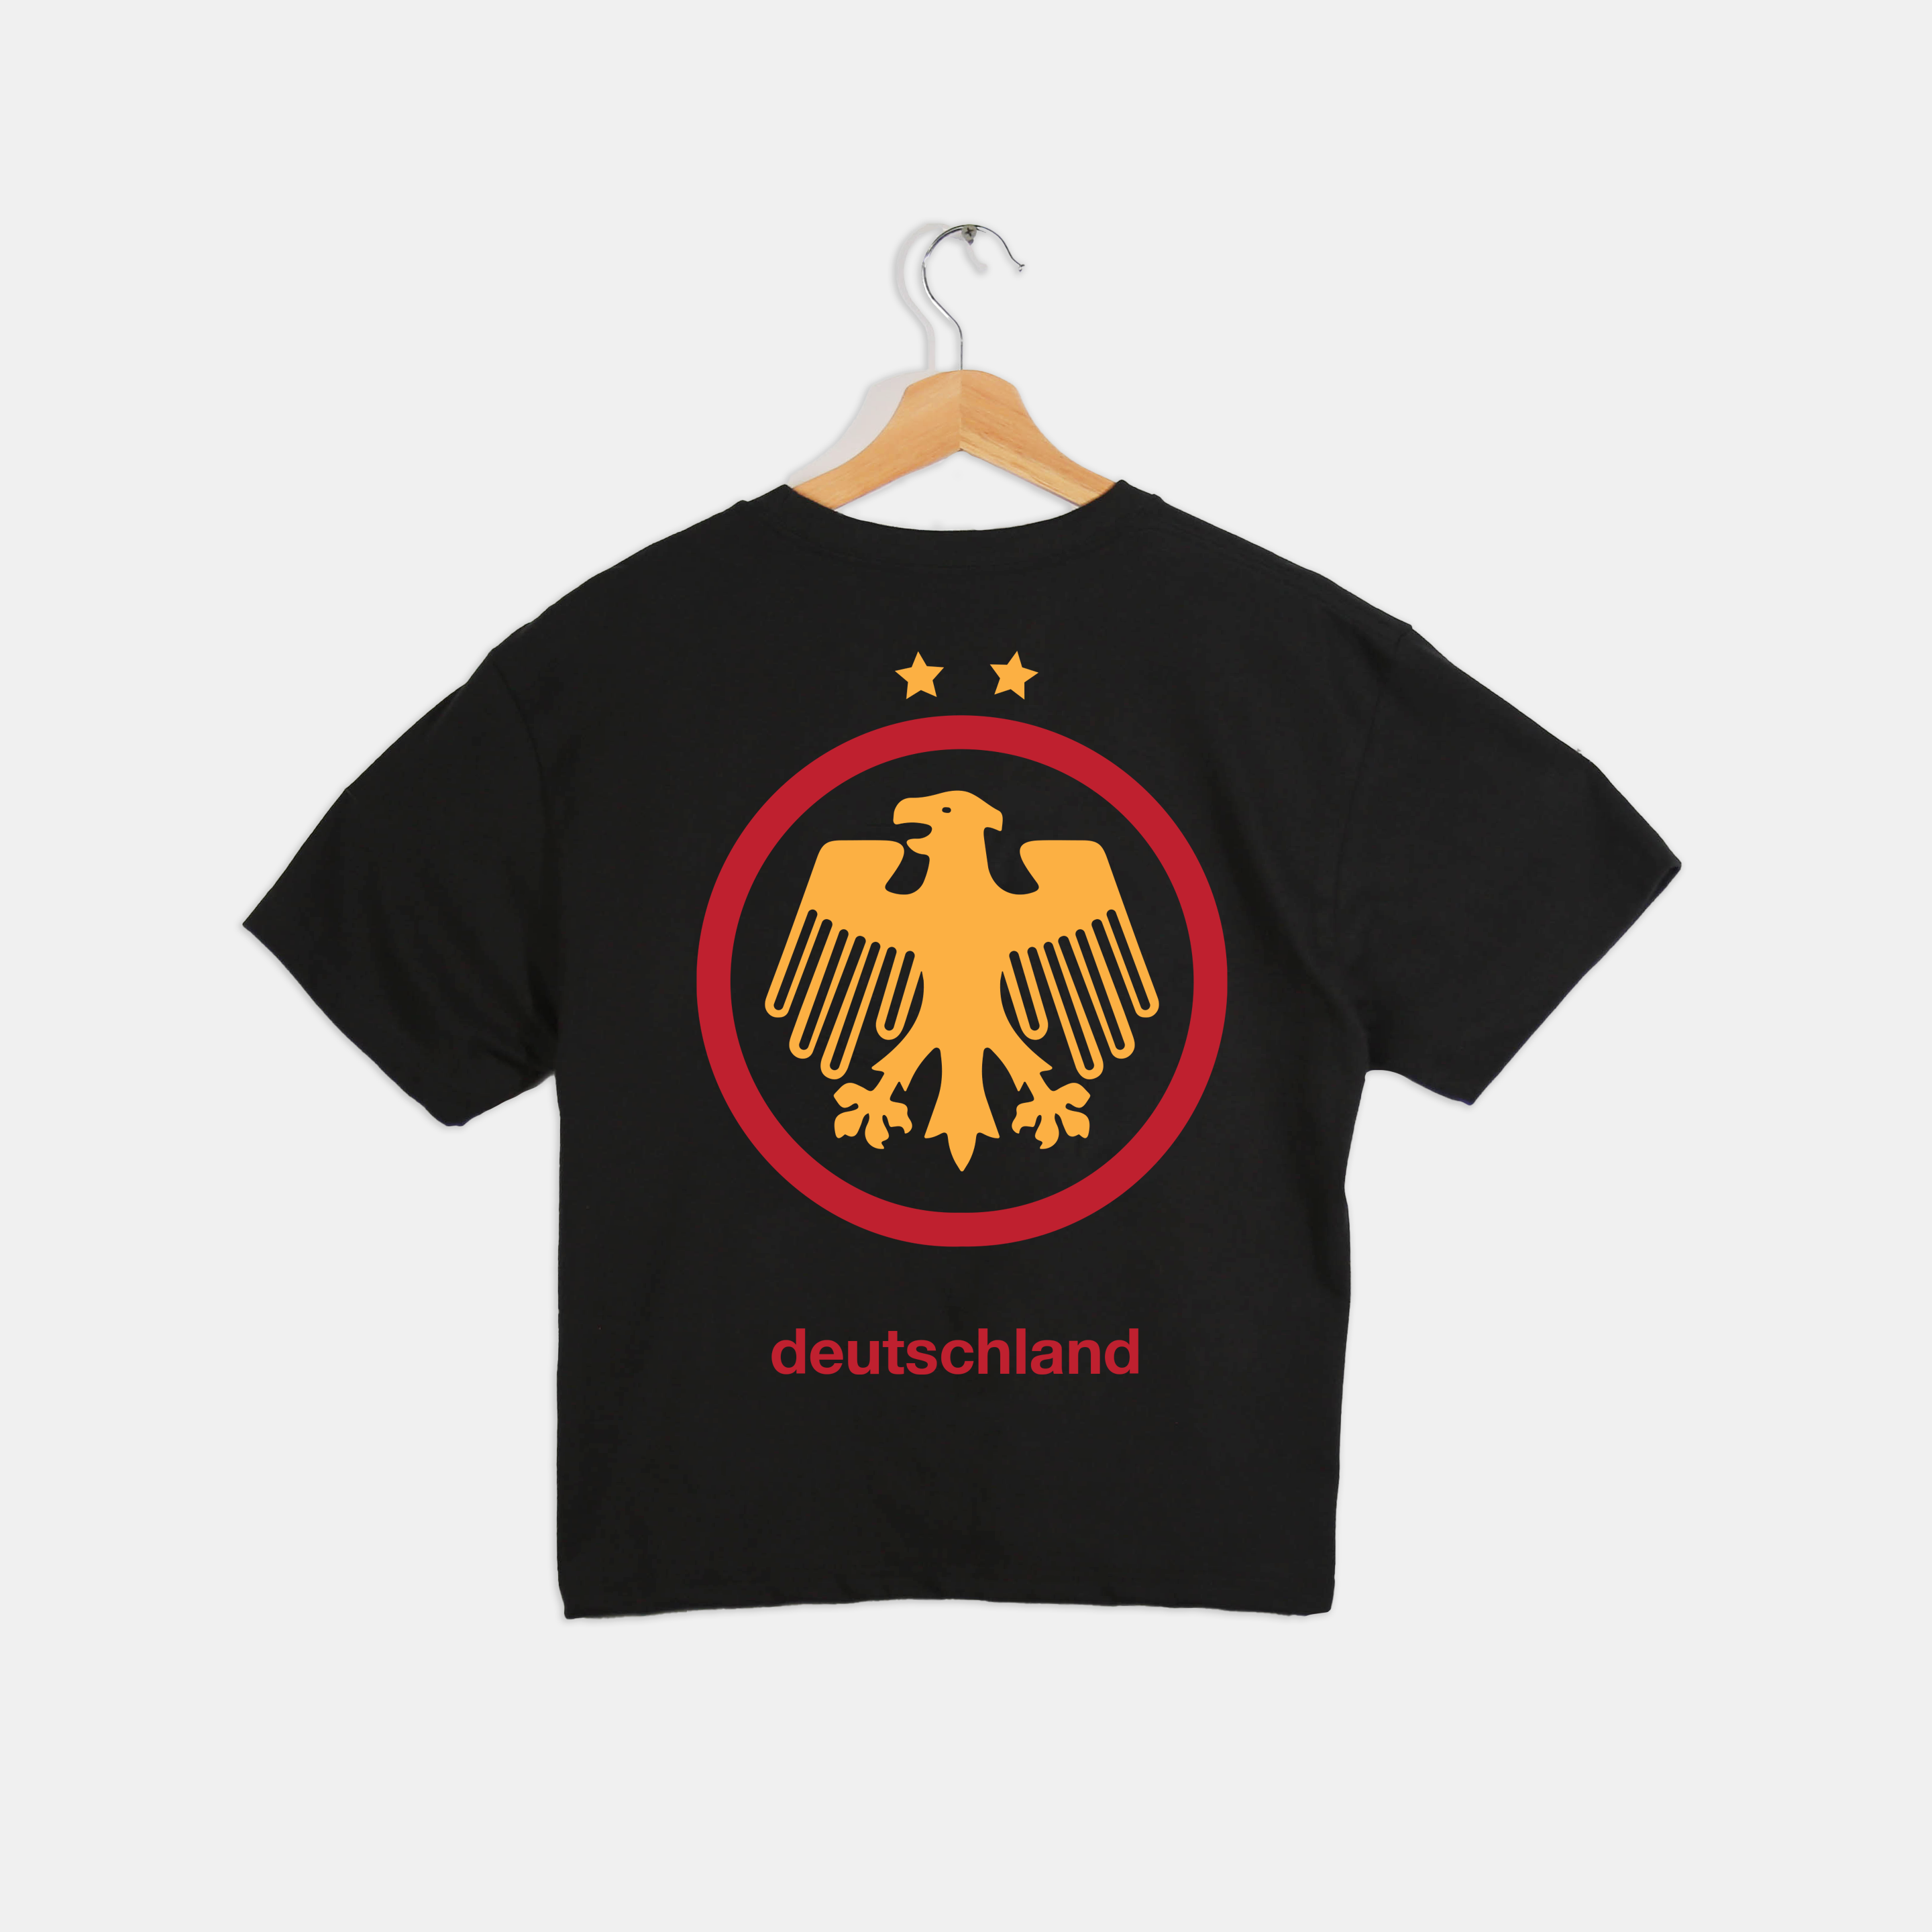 "Unofficial" Germany Cropped Tee